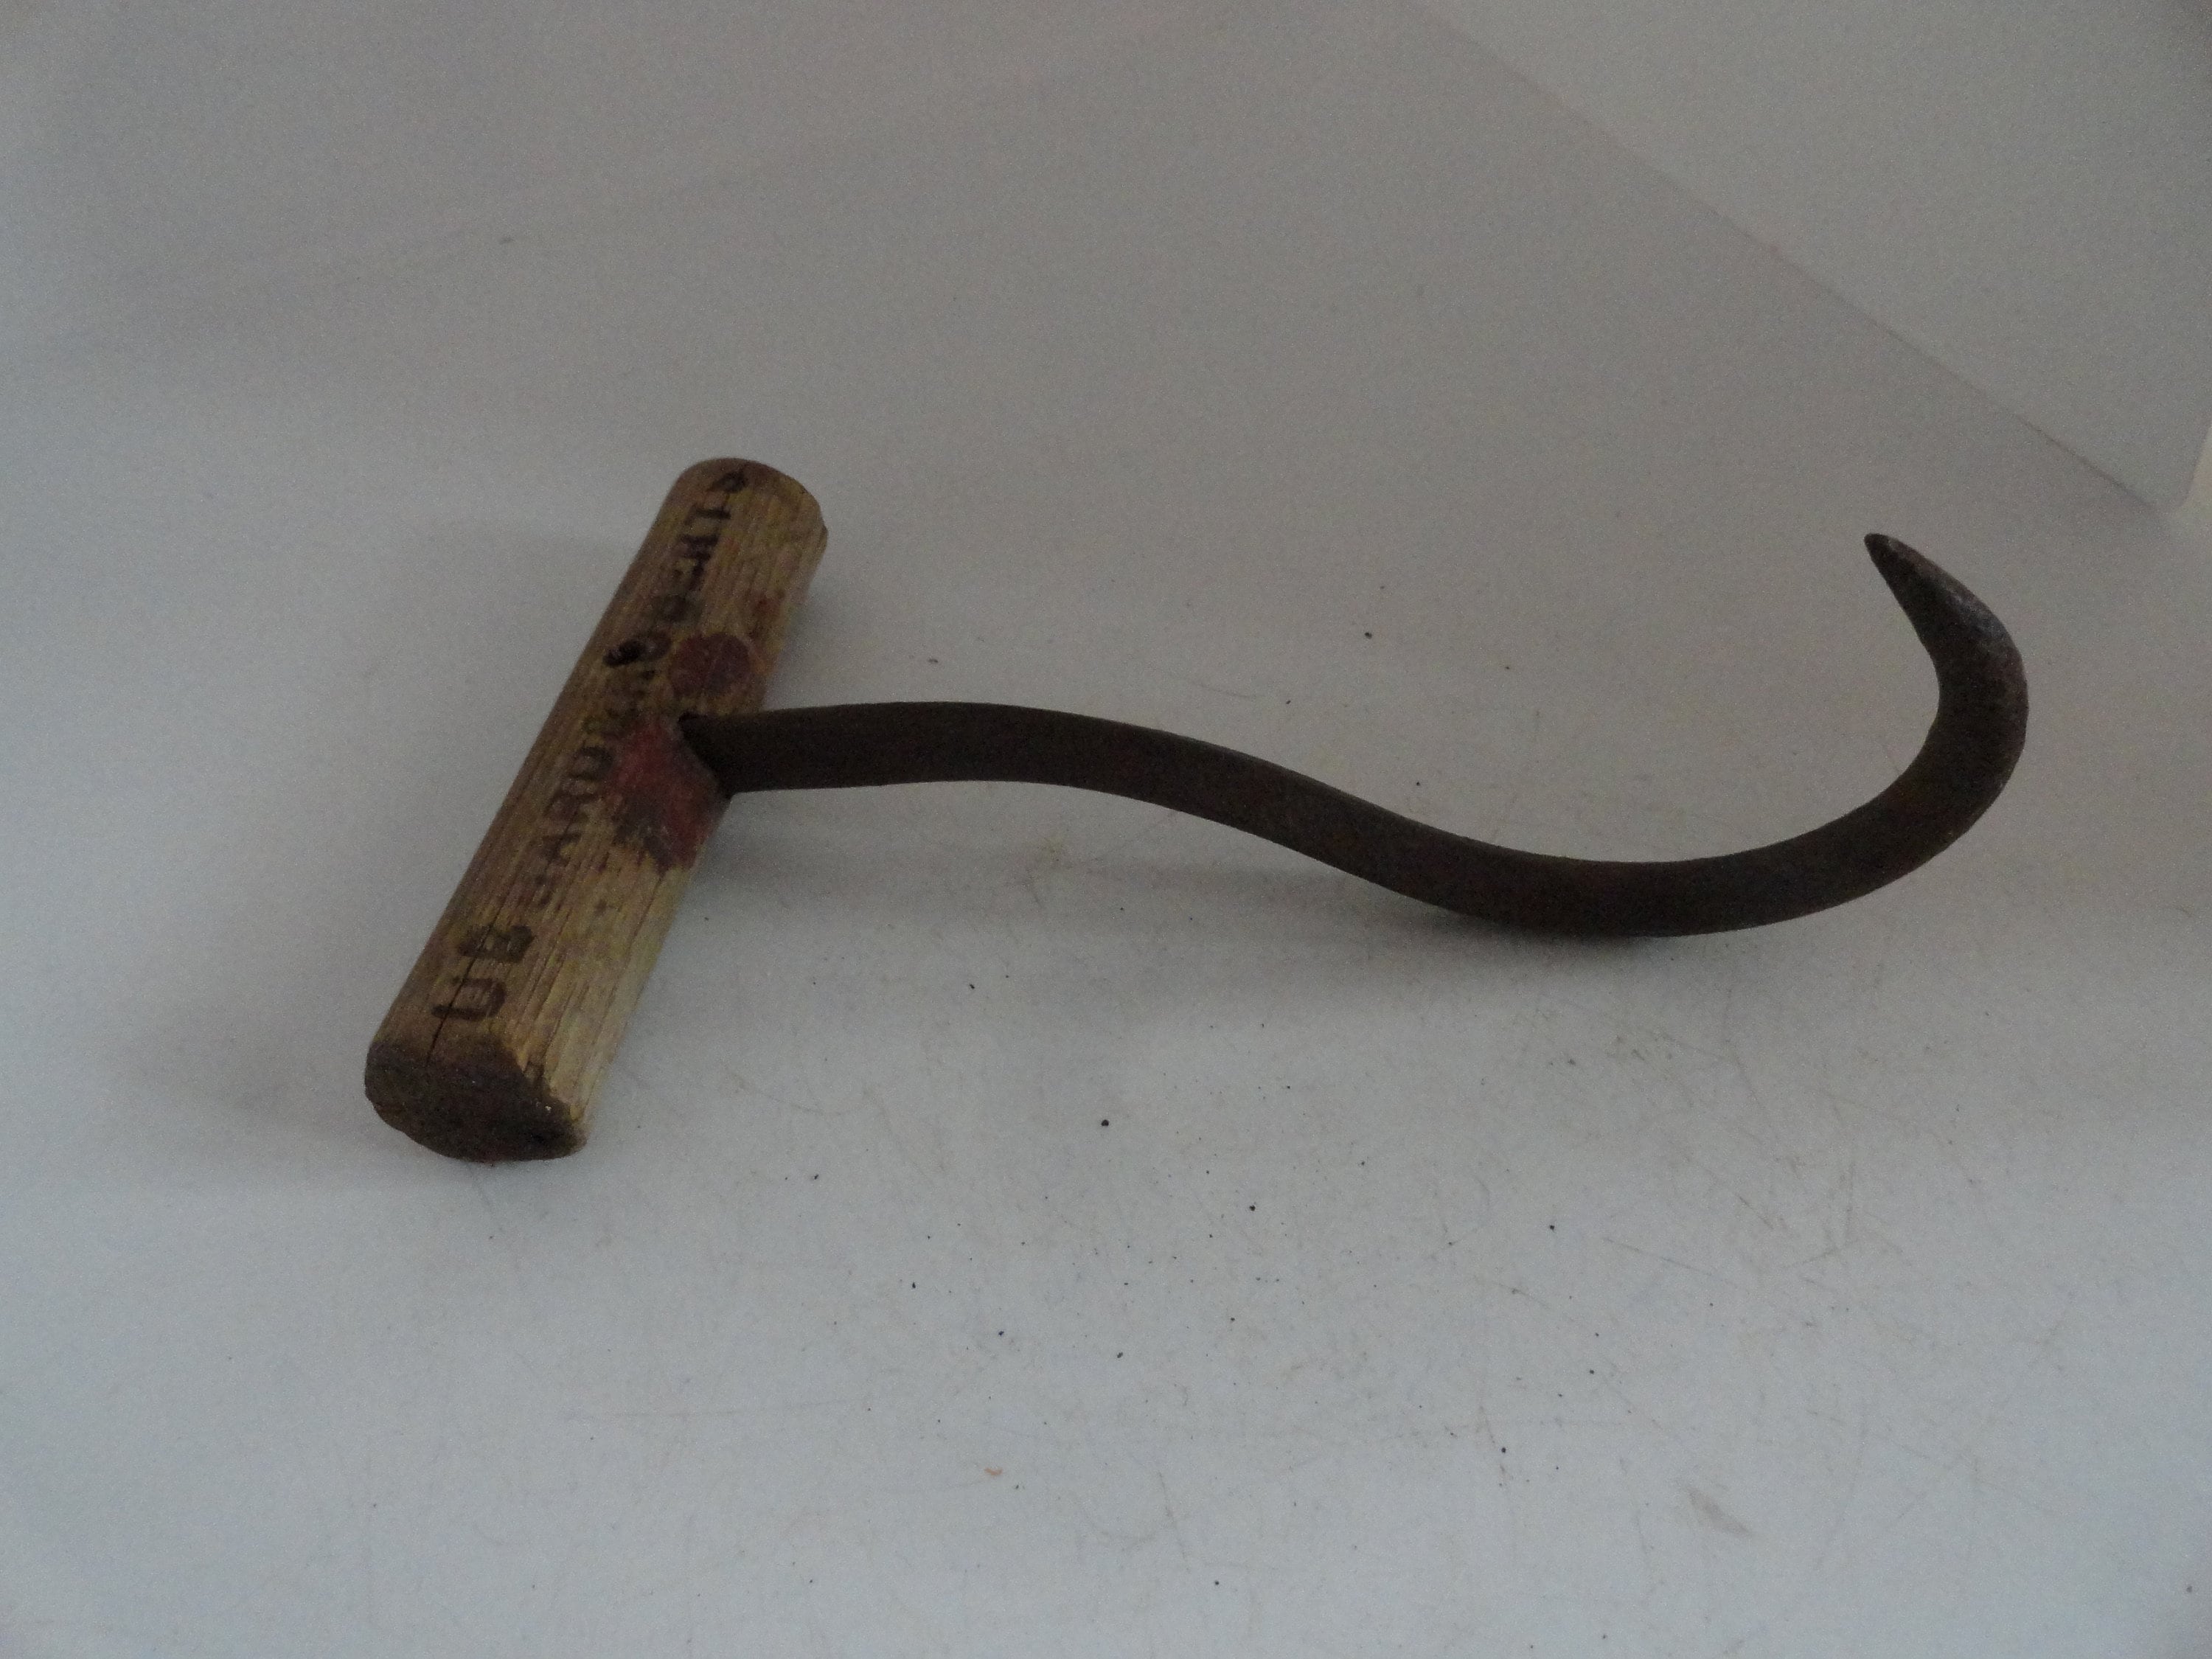 Vintage Hubbard & Roberts Hay Hook Wood and Steel Primitive Farm Hand Tool  1930s to 1950s Repurpose/reuse Plant Hanging Hanger Home Decor 